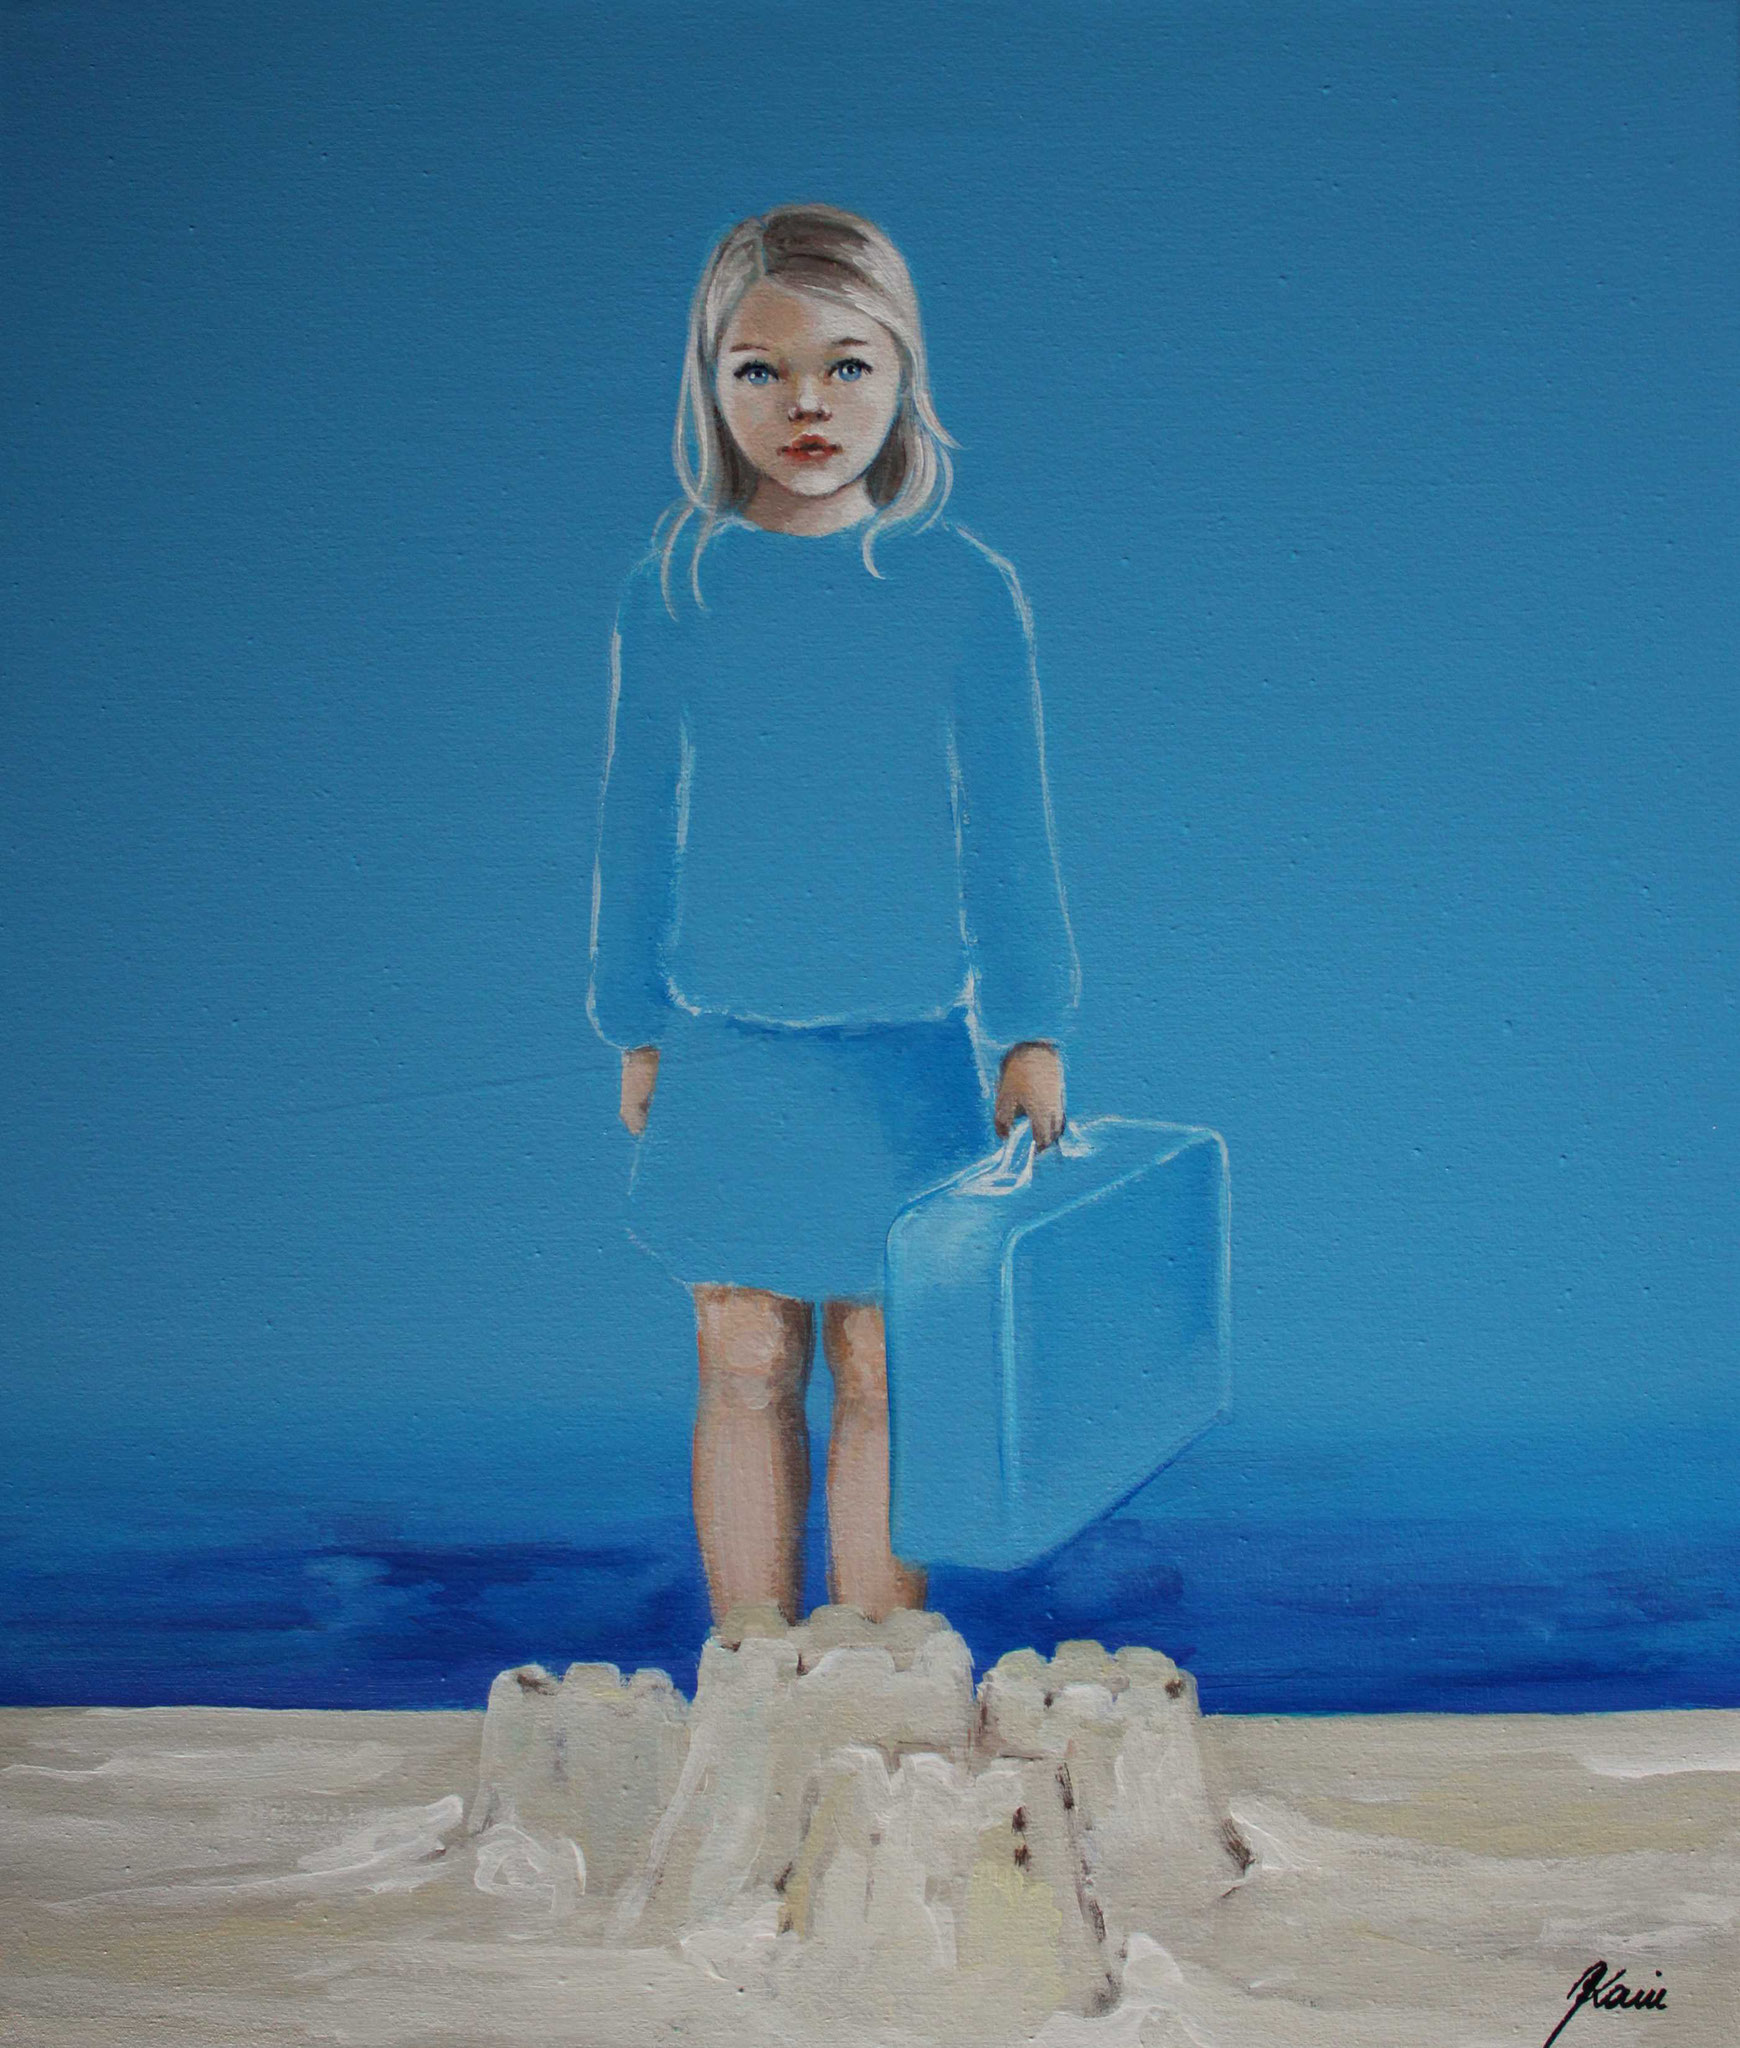 "Welcome Home (Child version)" 53 x 45 cm, Acrylic on canvas, Exhibition JAPAN 2021 